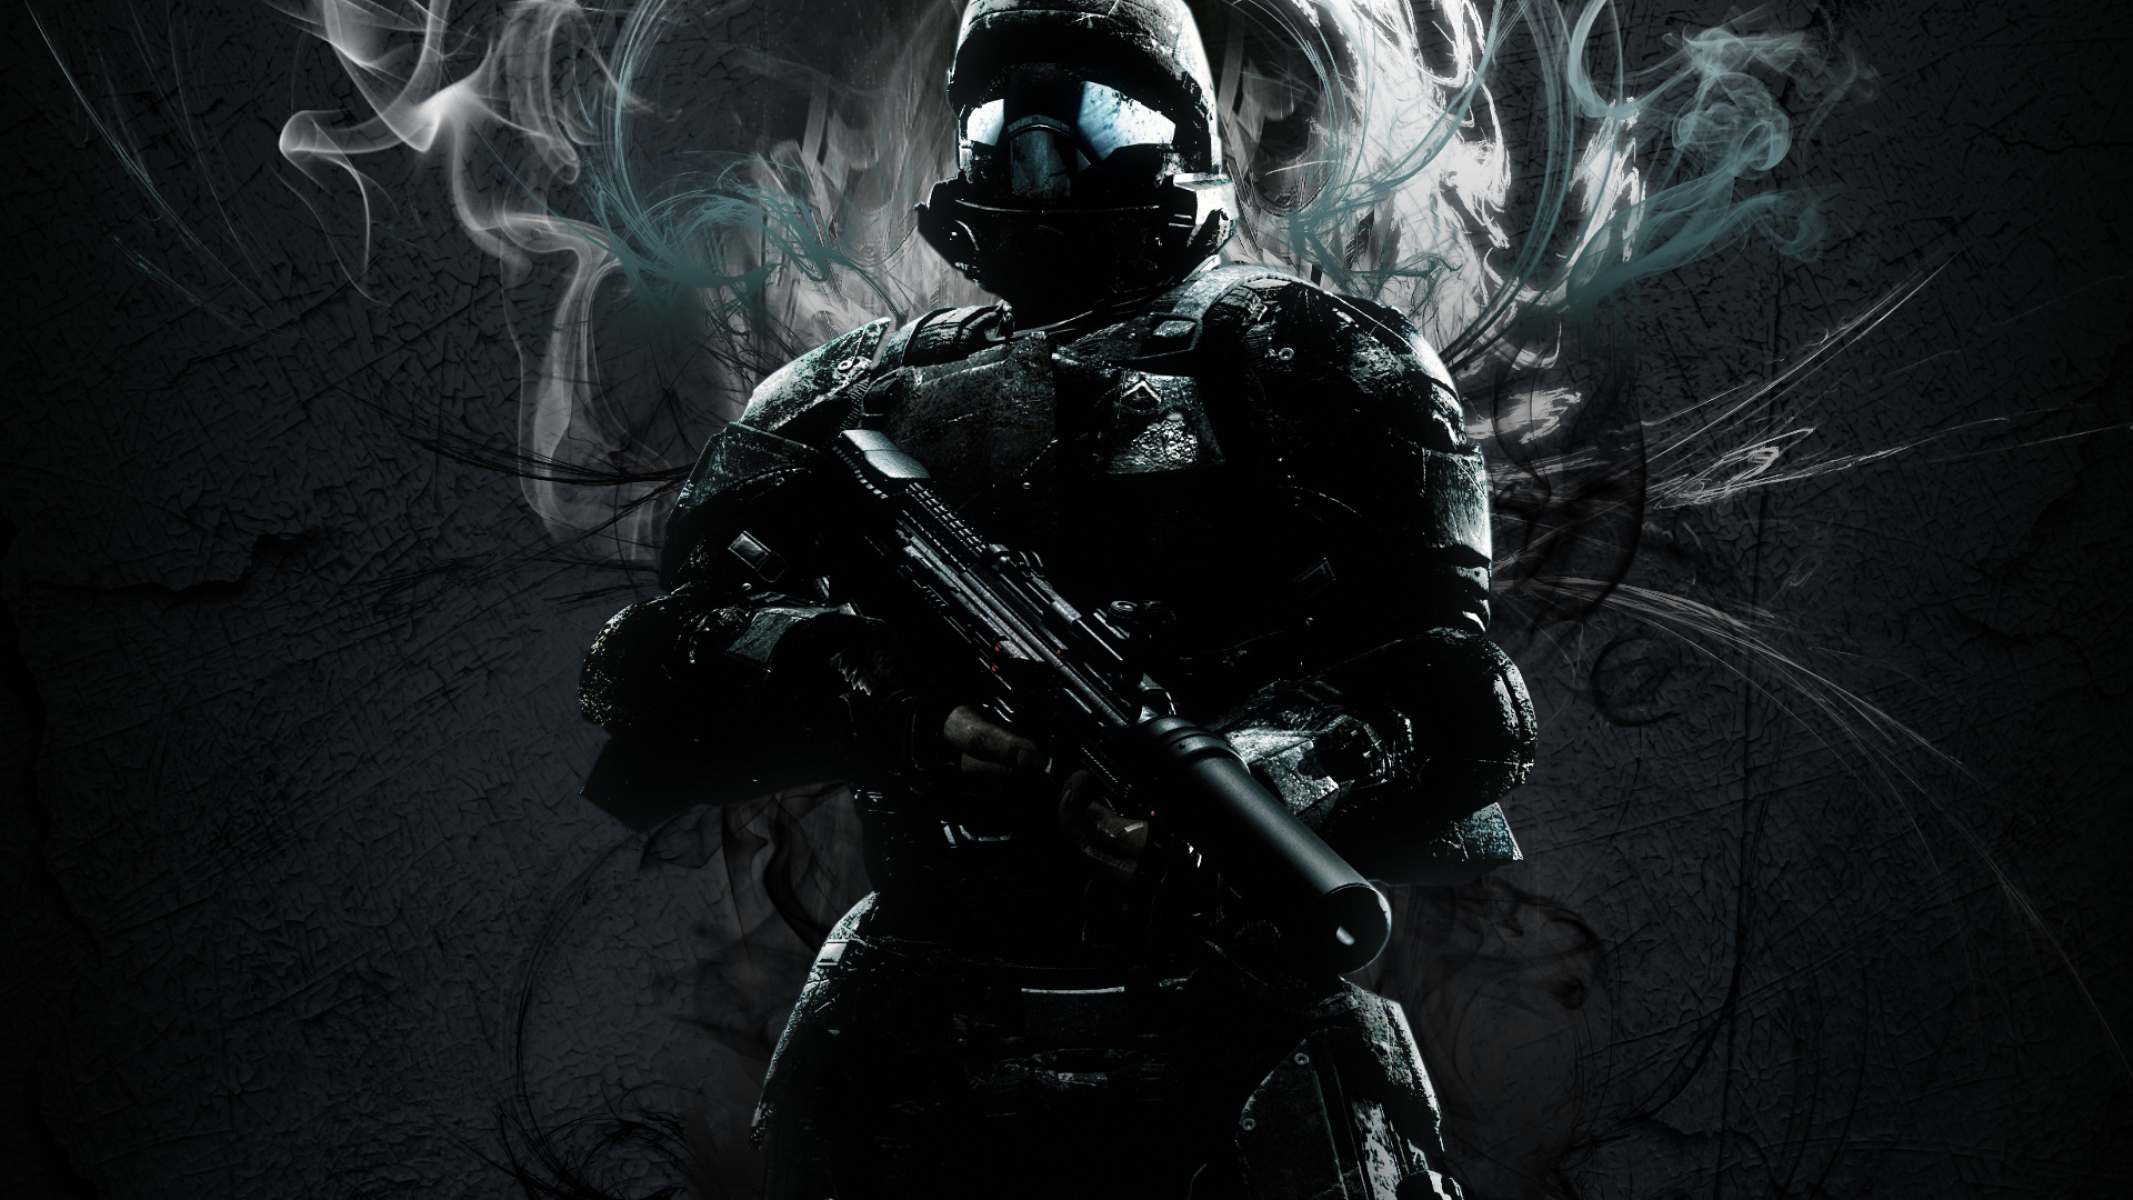 Halo 3: ODST, Halo-themed wallpaper, Gaming aesthetic, Visual masterpiece, 2140x1200 HD Desktop